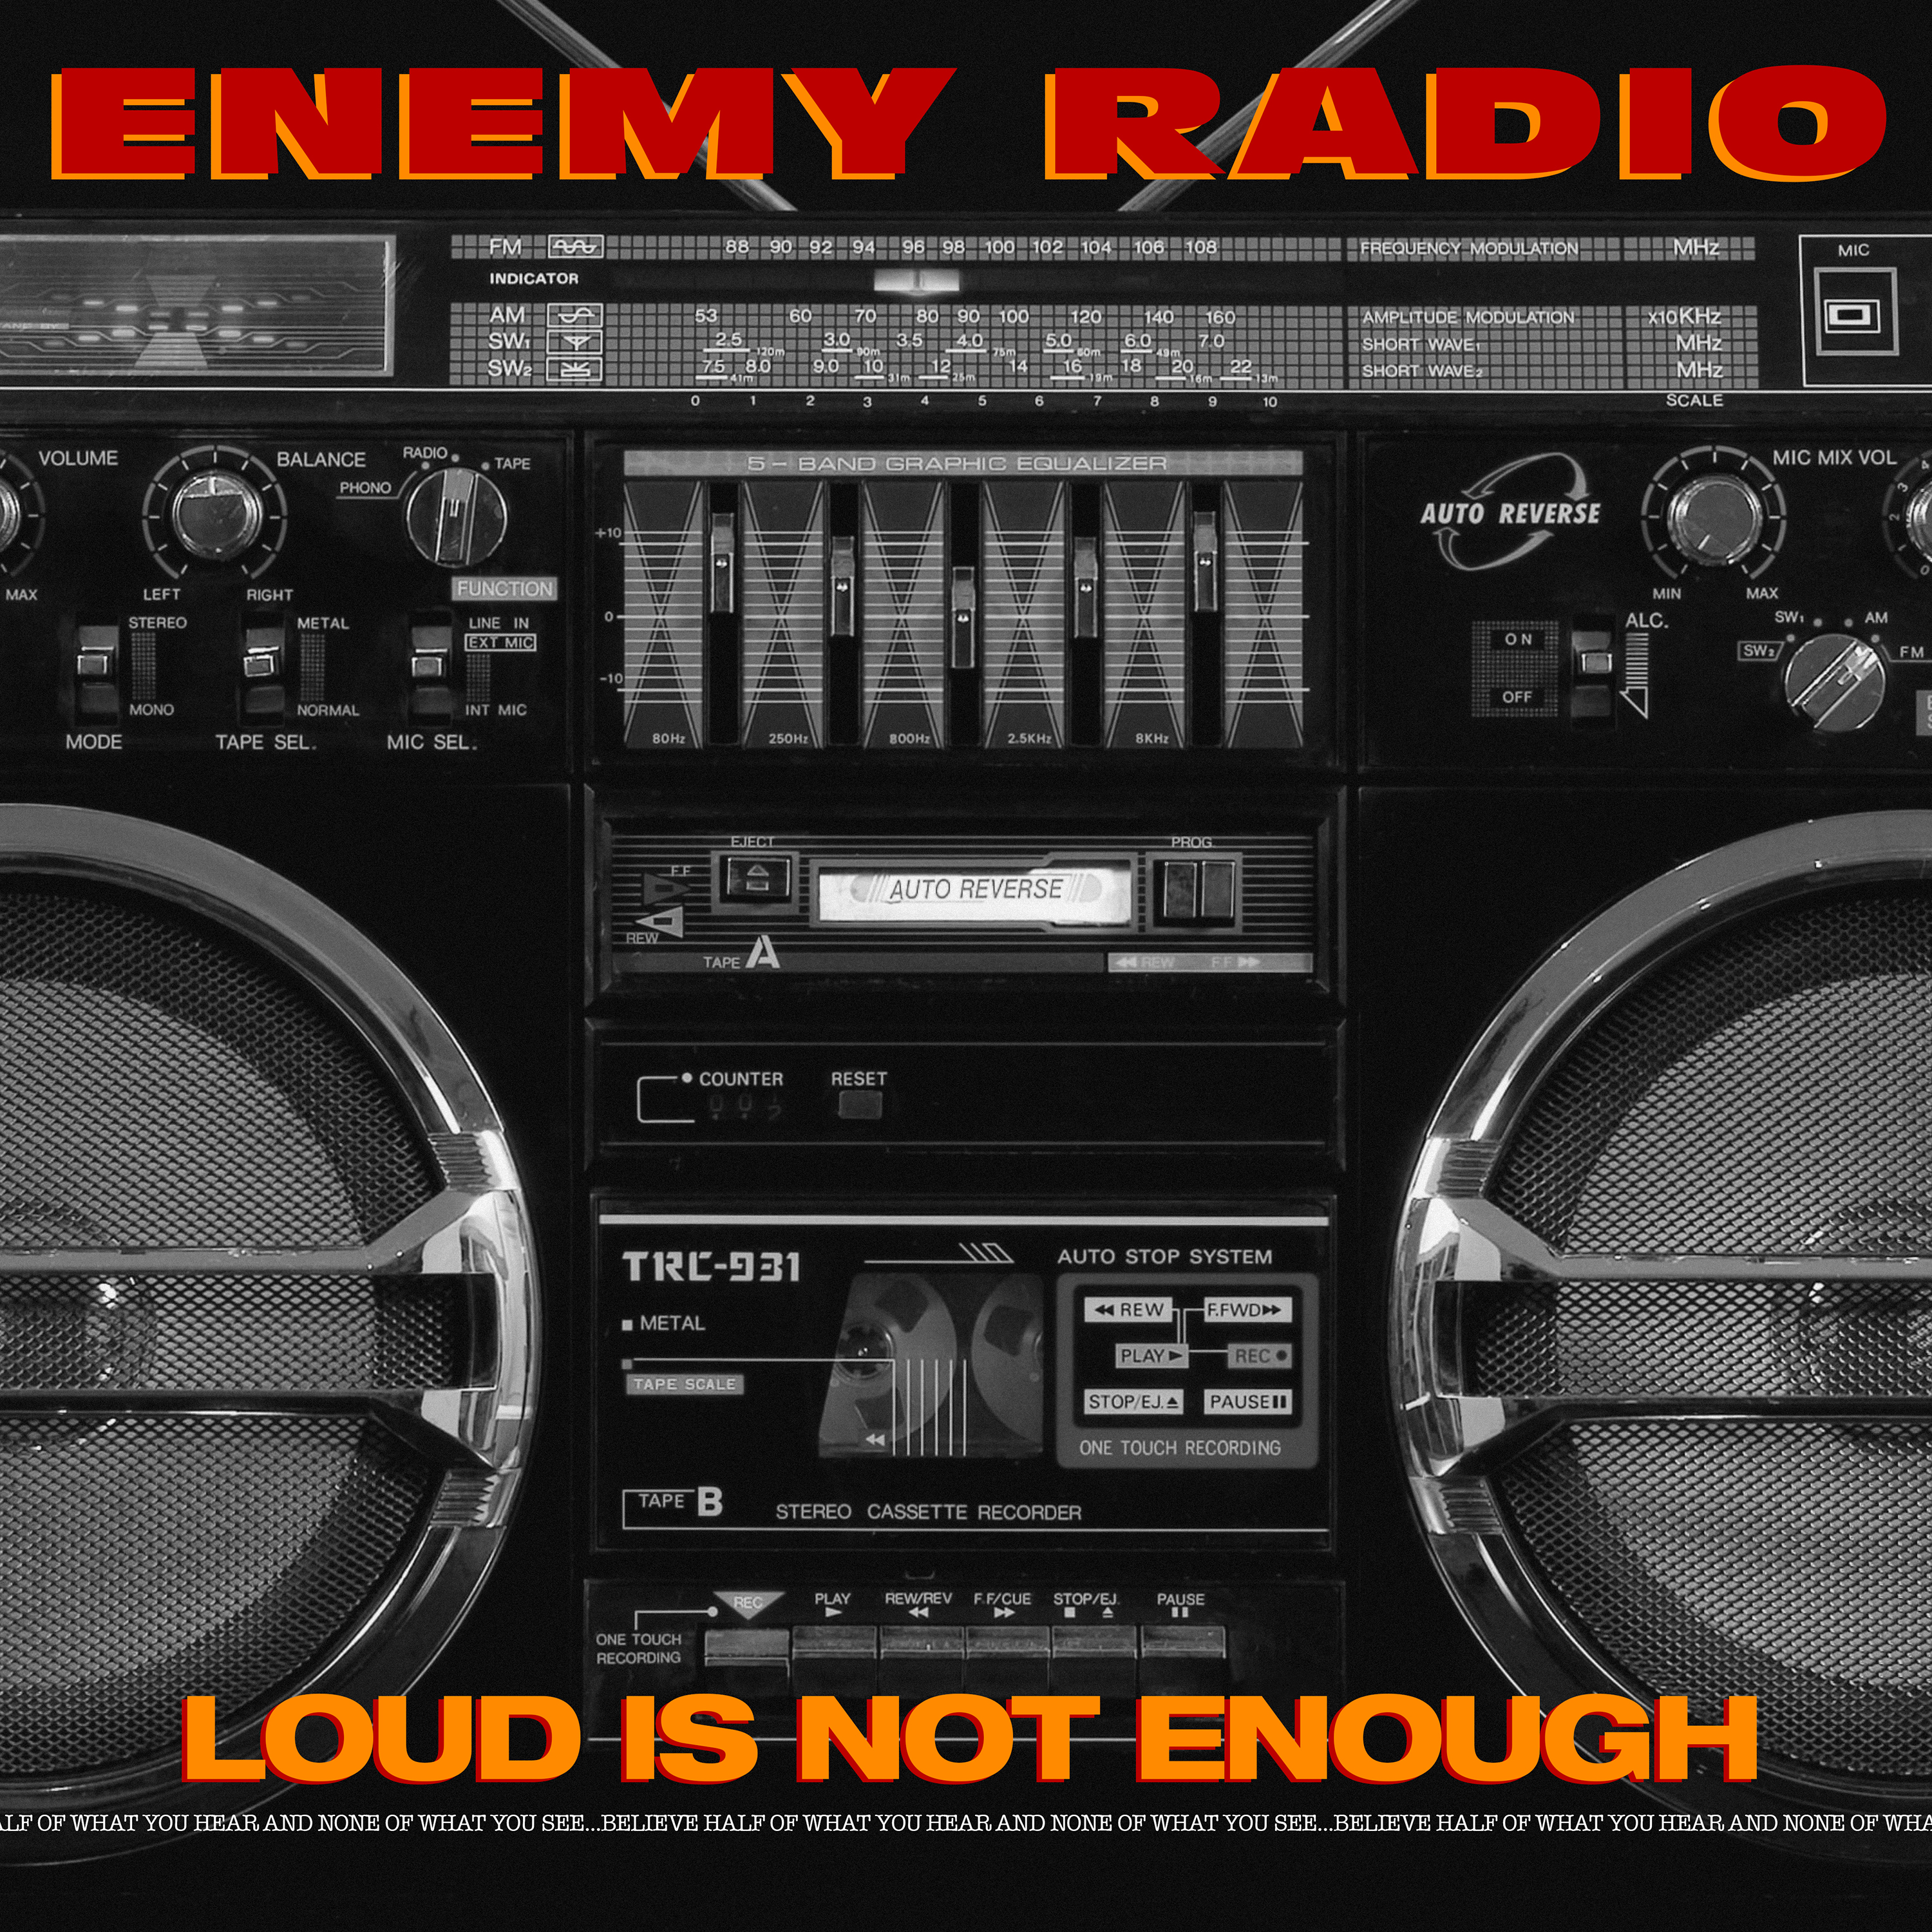 Art for The Kids Ain't Alright by Enemy Radio